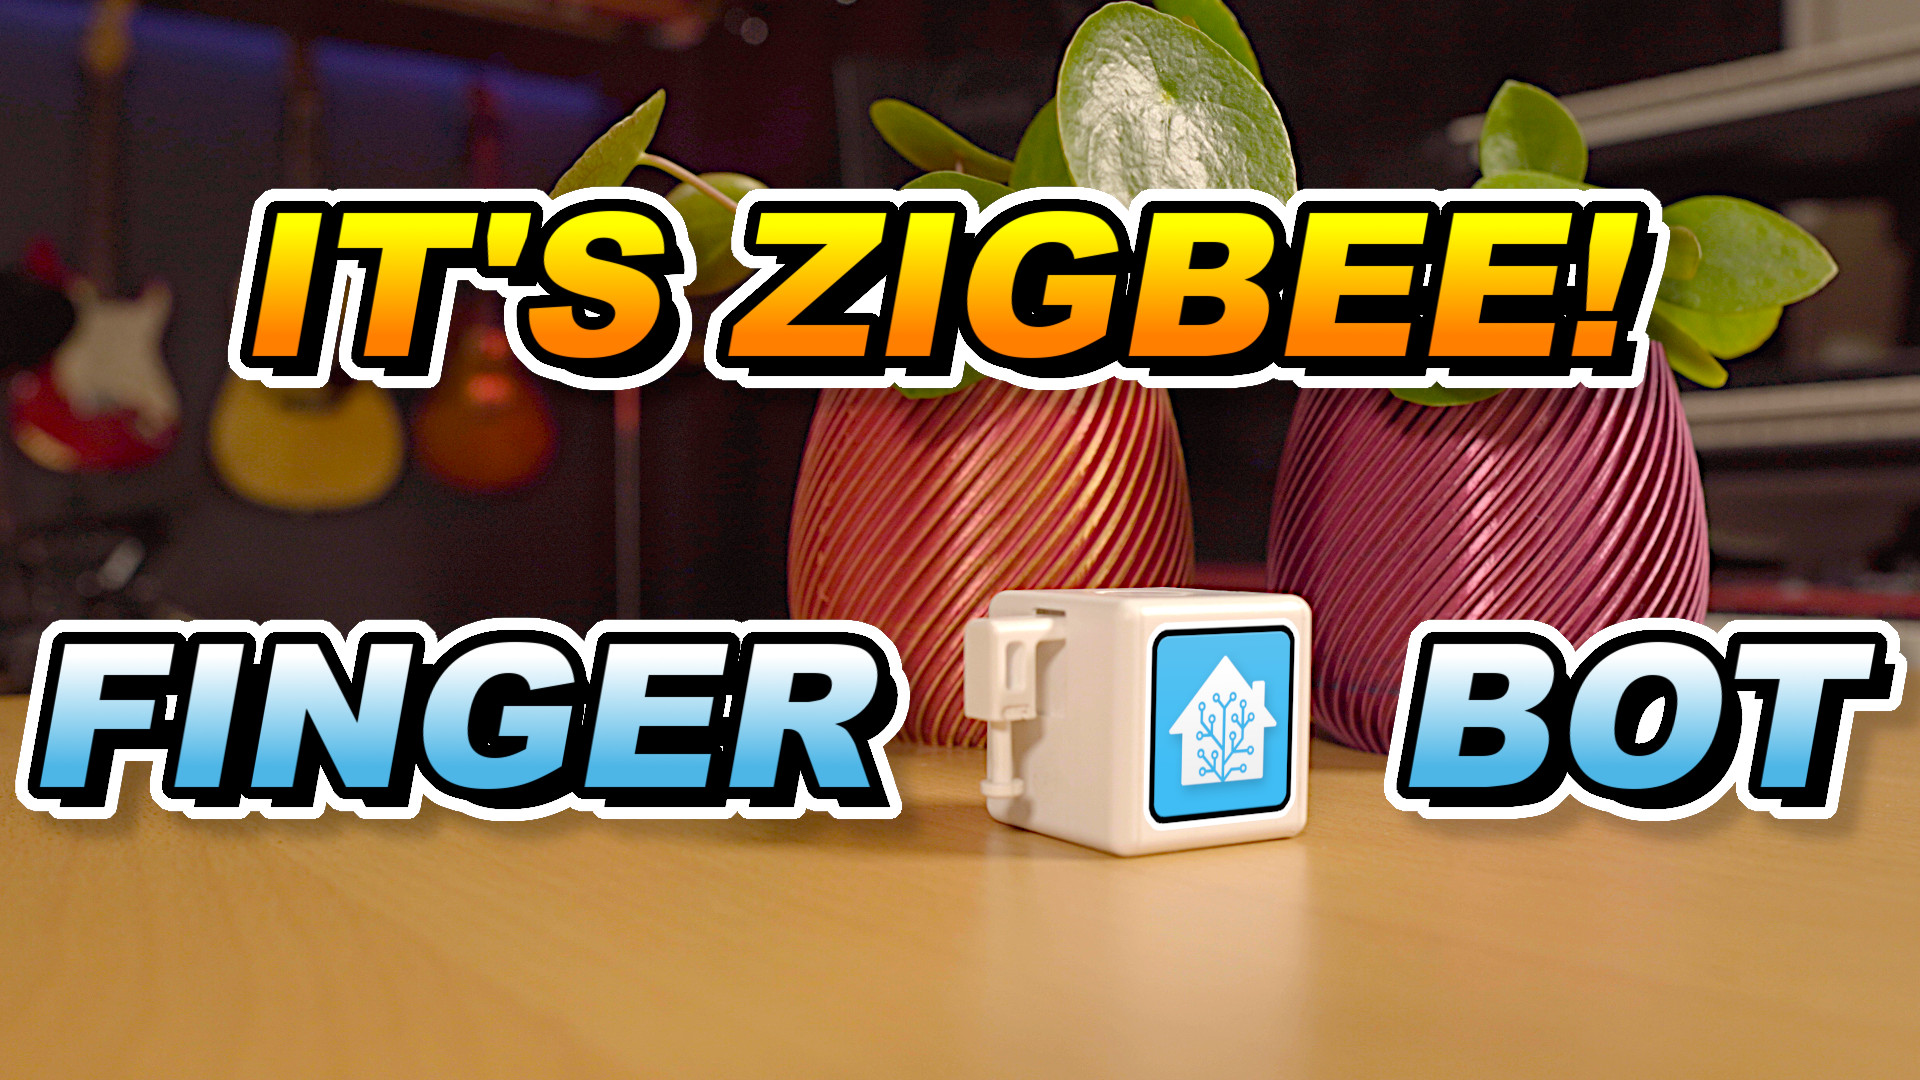 Fingerbot + Zigbee: The Ultimate Combination for Home Automation?